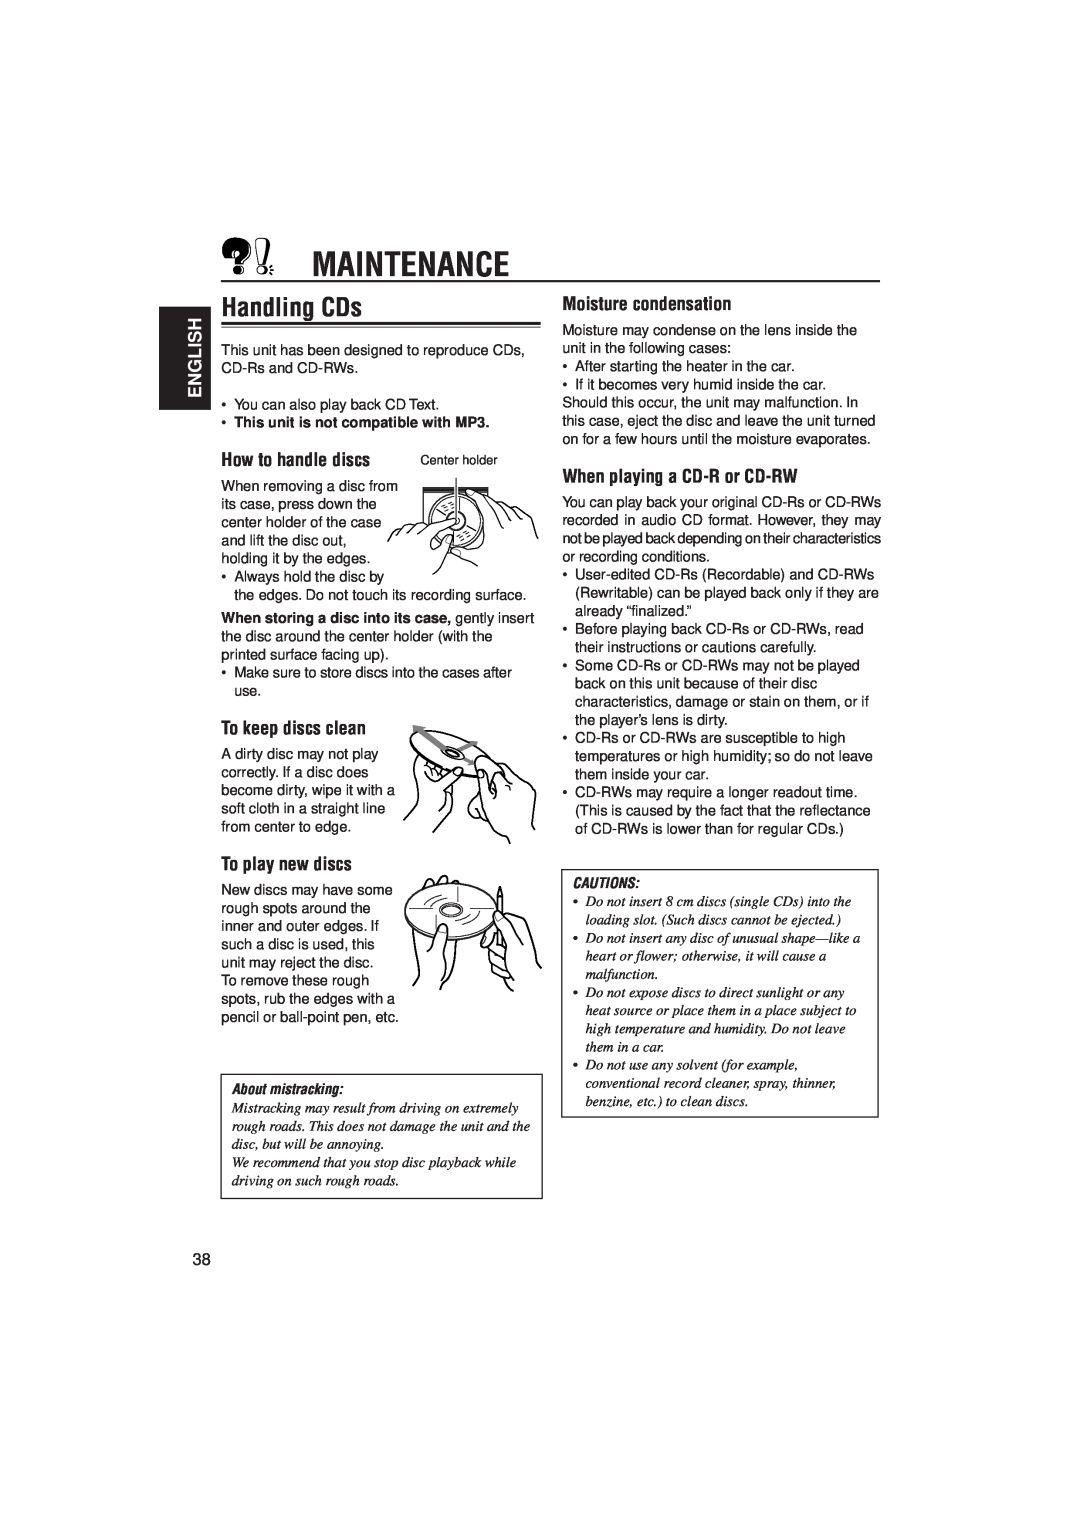 JVC KD-SX921R manual Maintenance, Handling CDs, Moisture condensation, How to handle discs, To keep discs clean, English 